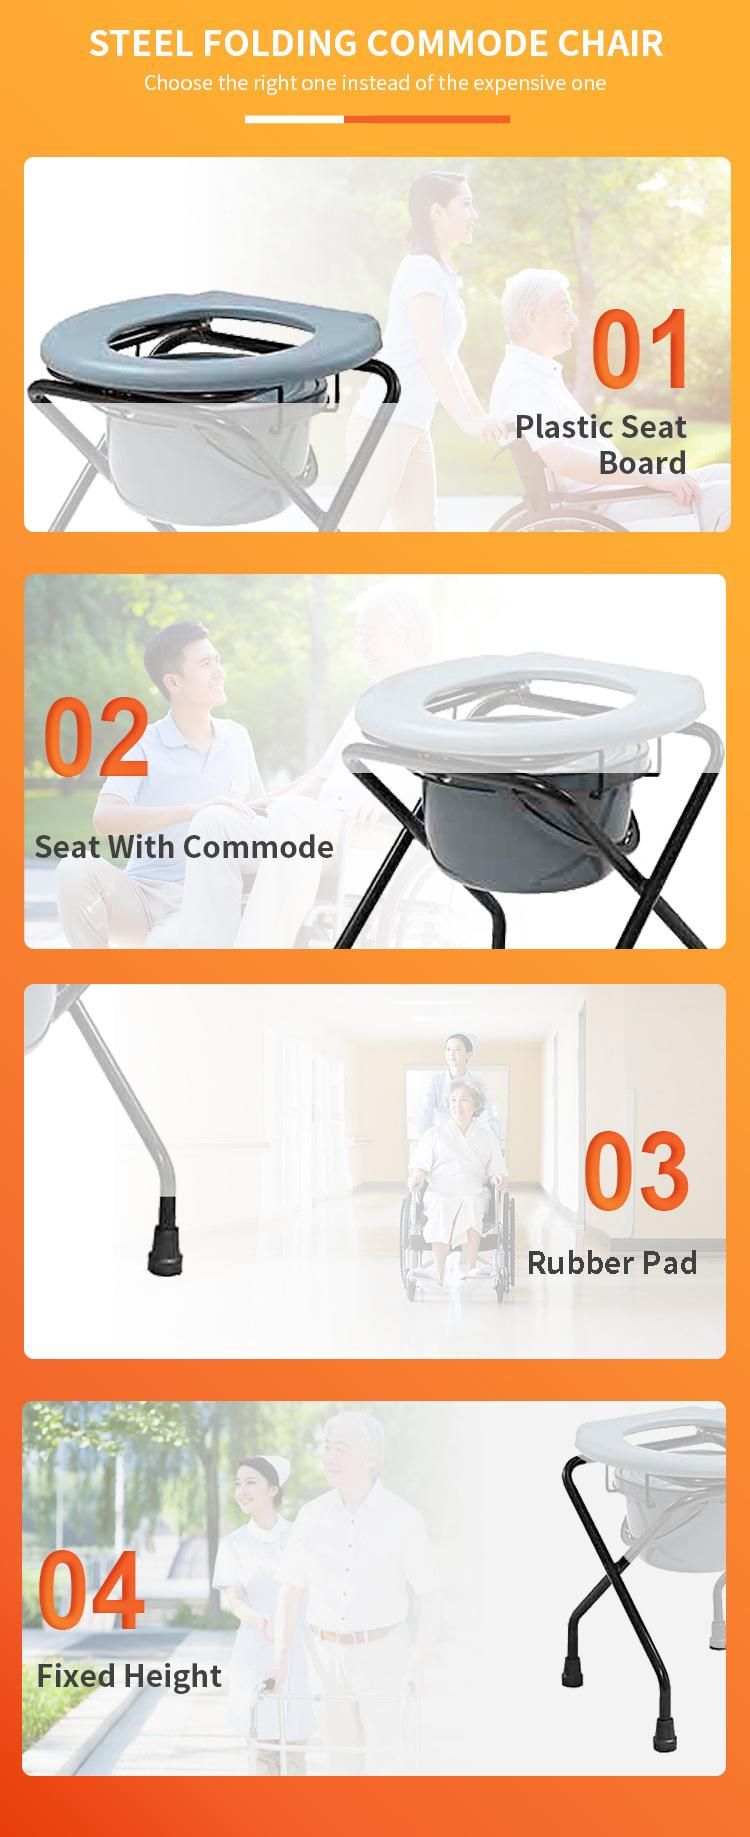 Toilet Seat Foldable Commode Chair Cheapest Bedside Hospital Equipment Patient Steel with Bucket Limited Mobility People